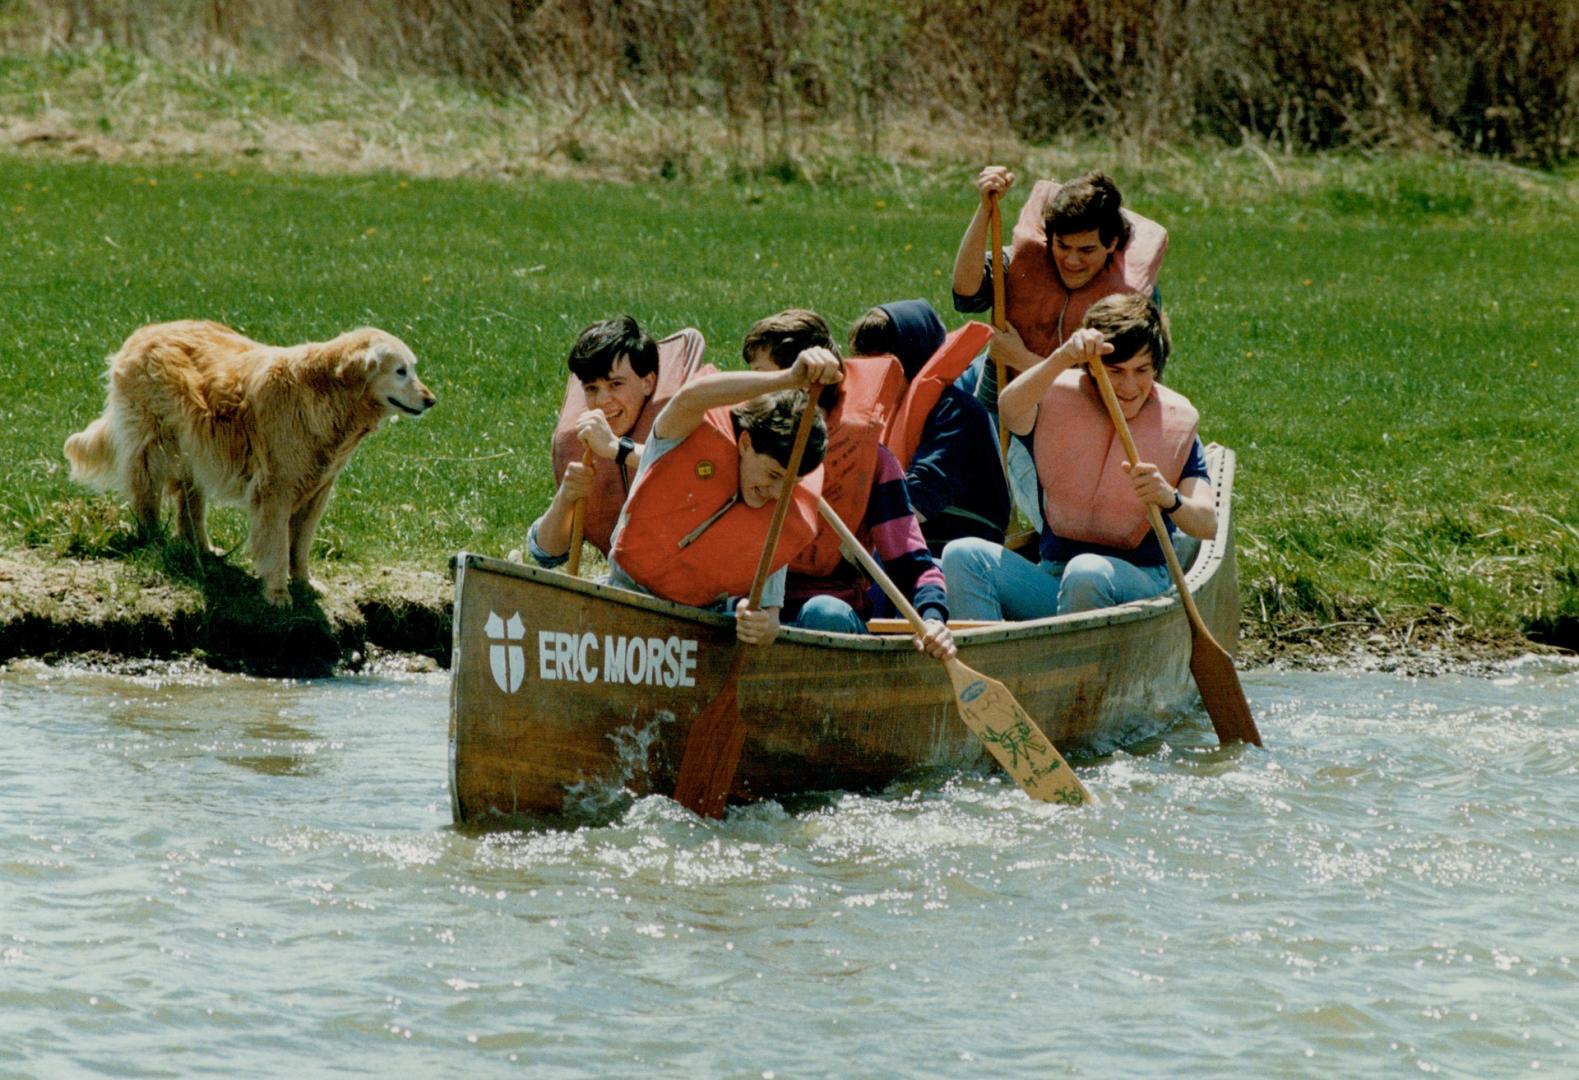 St. John's School keeps paddling along, Students of St. John's School in Claremont practise canoeing in a small pond behind the private boys' school